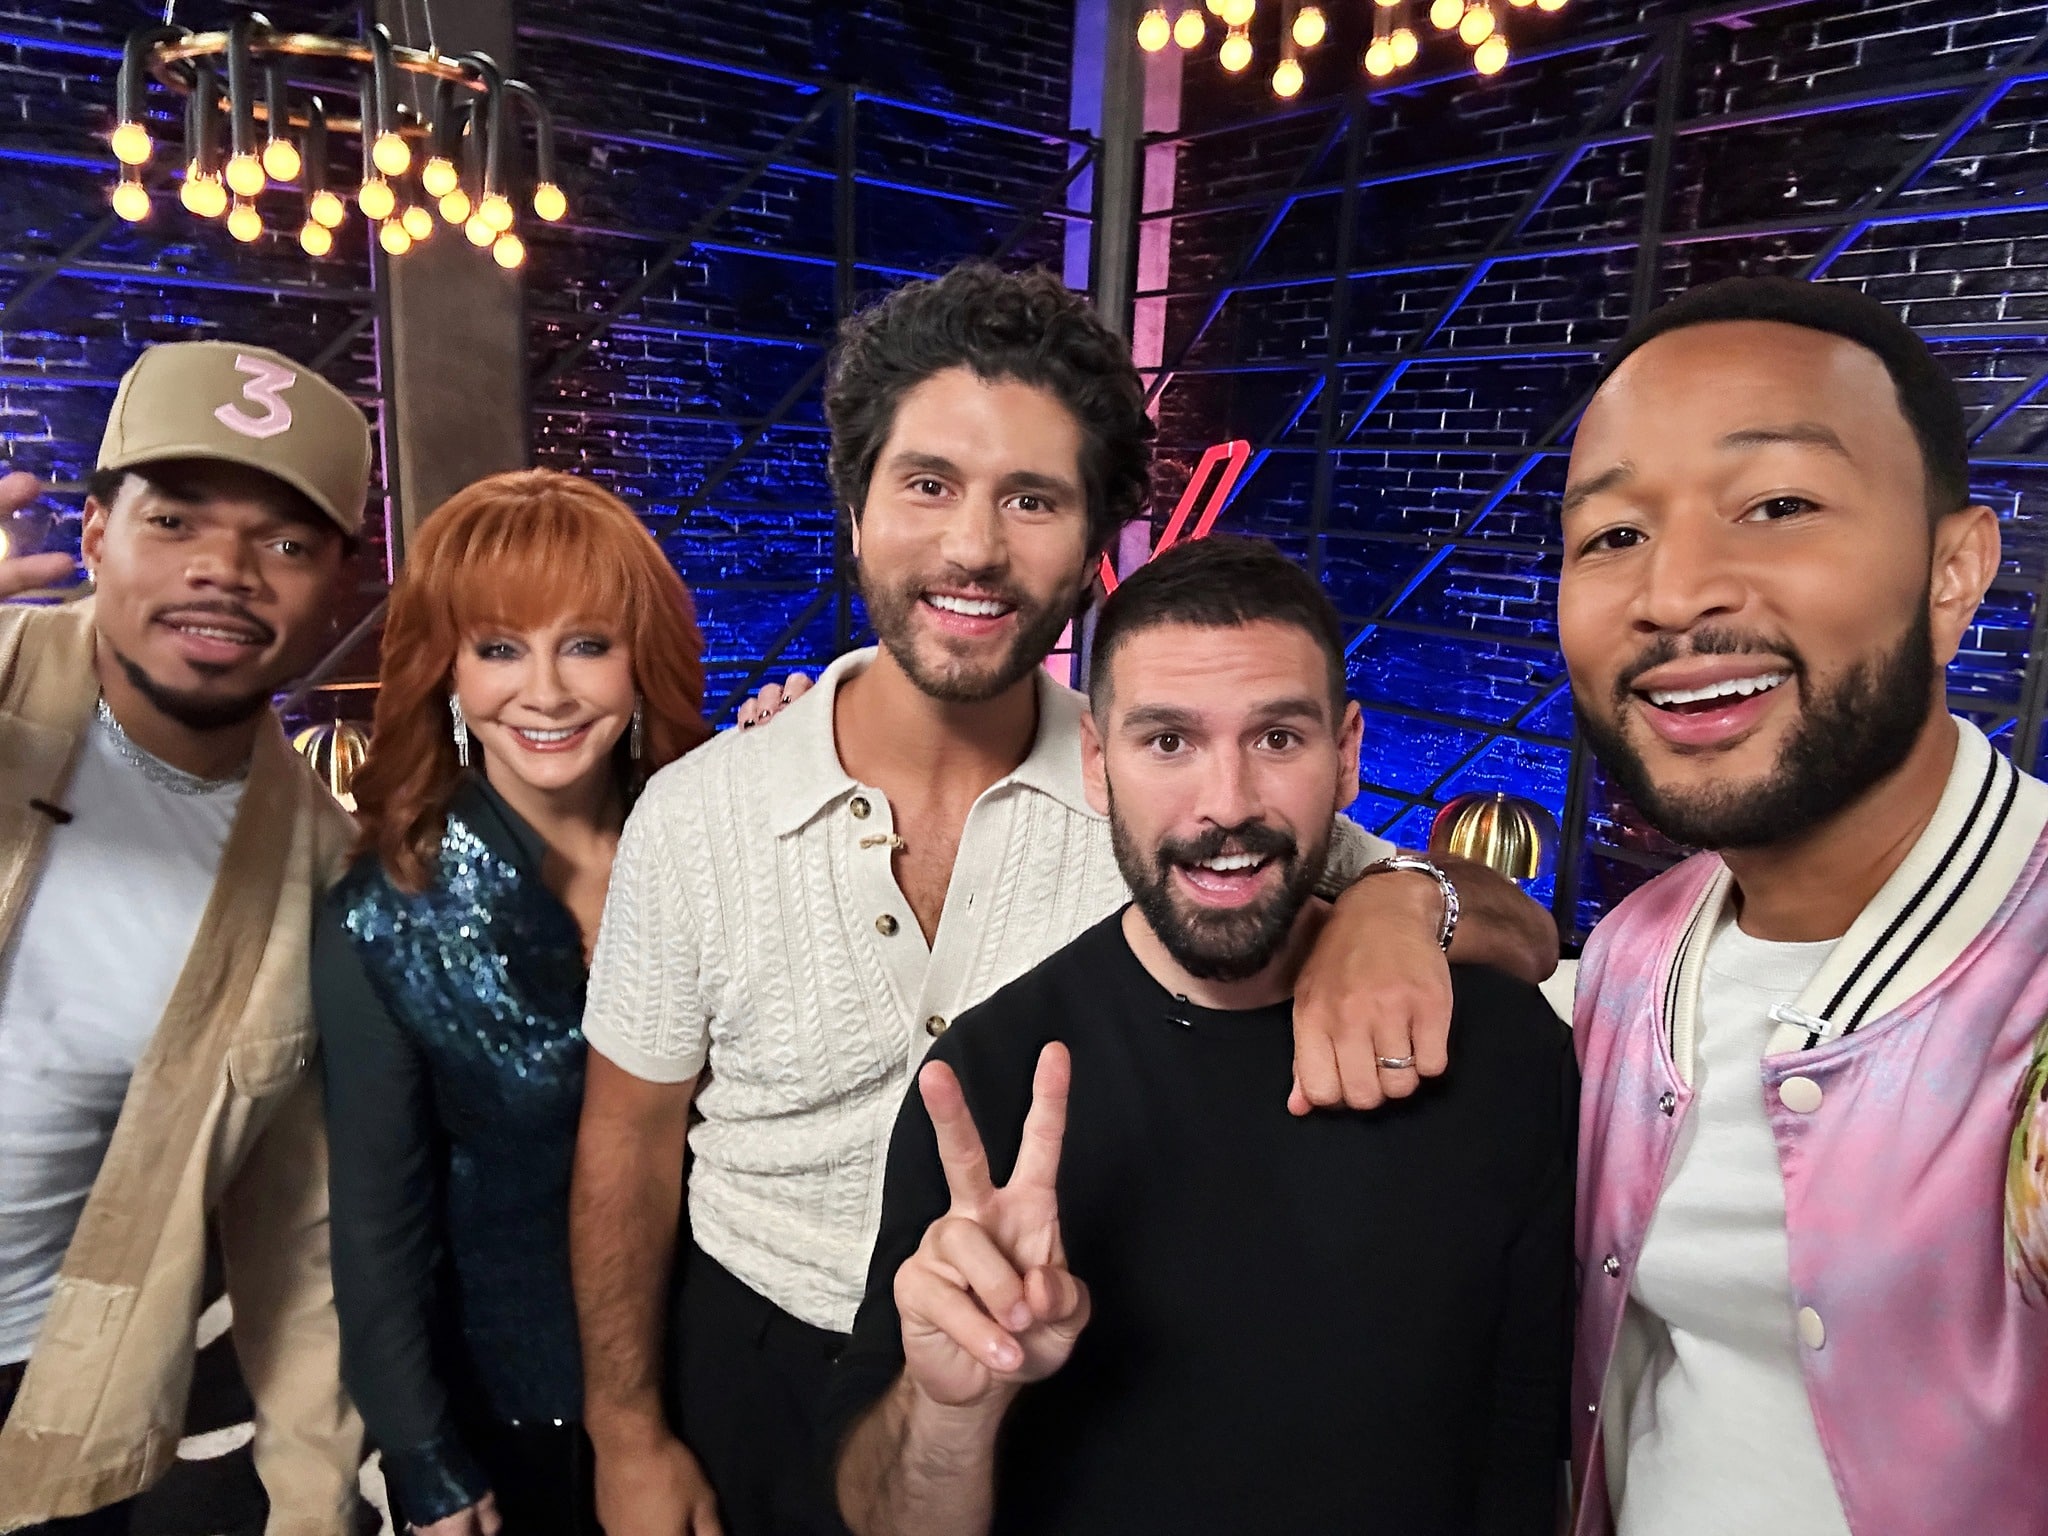 Reba McEntire shared a big change is coming to The Voice in Season 25. Here, she's pictured with her fellow coaches Chance the Rapper, Dan + Shay, and John Legend